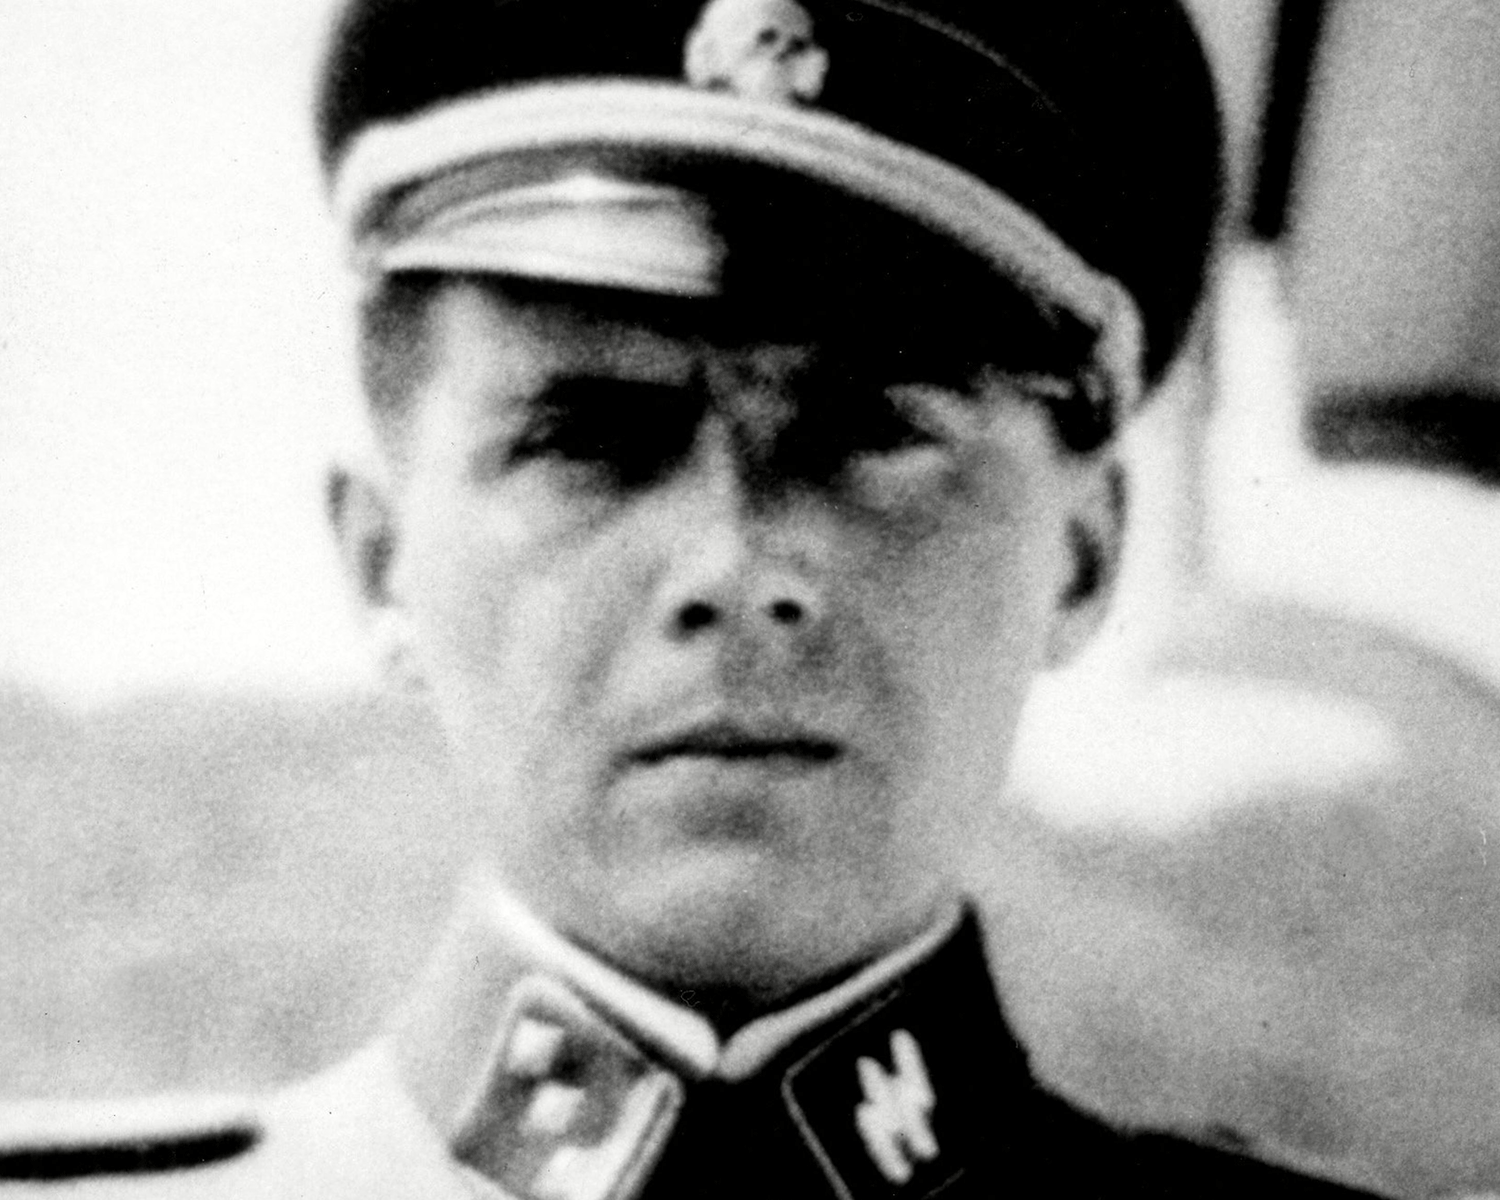 Josef Mengele escaped capture until his death by accidental drowning in Sao Paulo